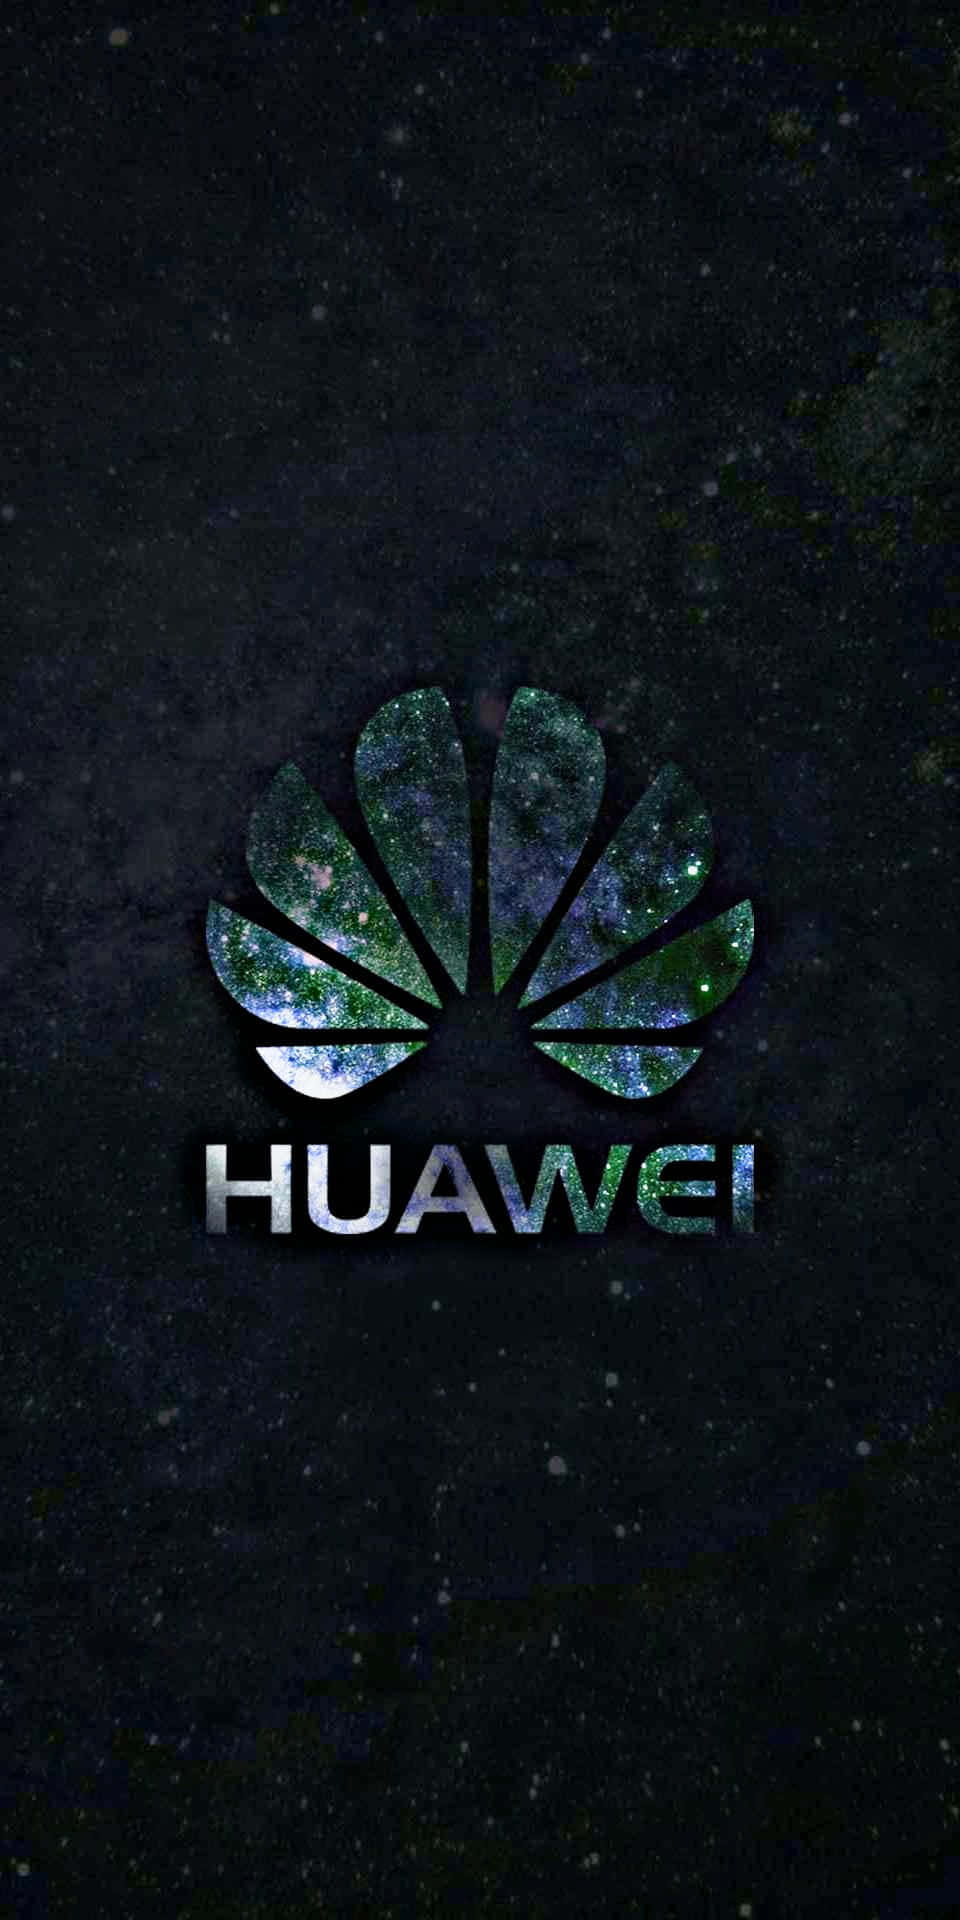 Introducing the Next Level in Innovation and Technology: Huawei